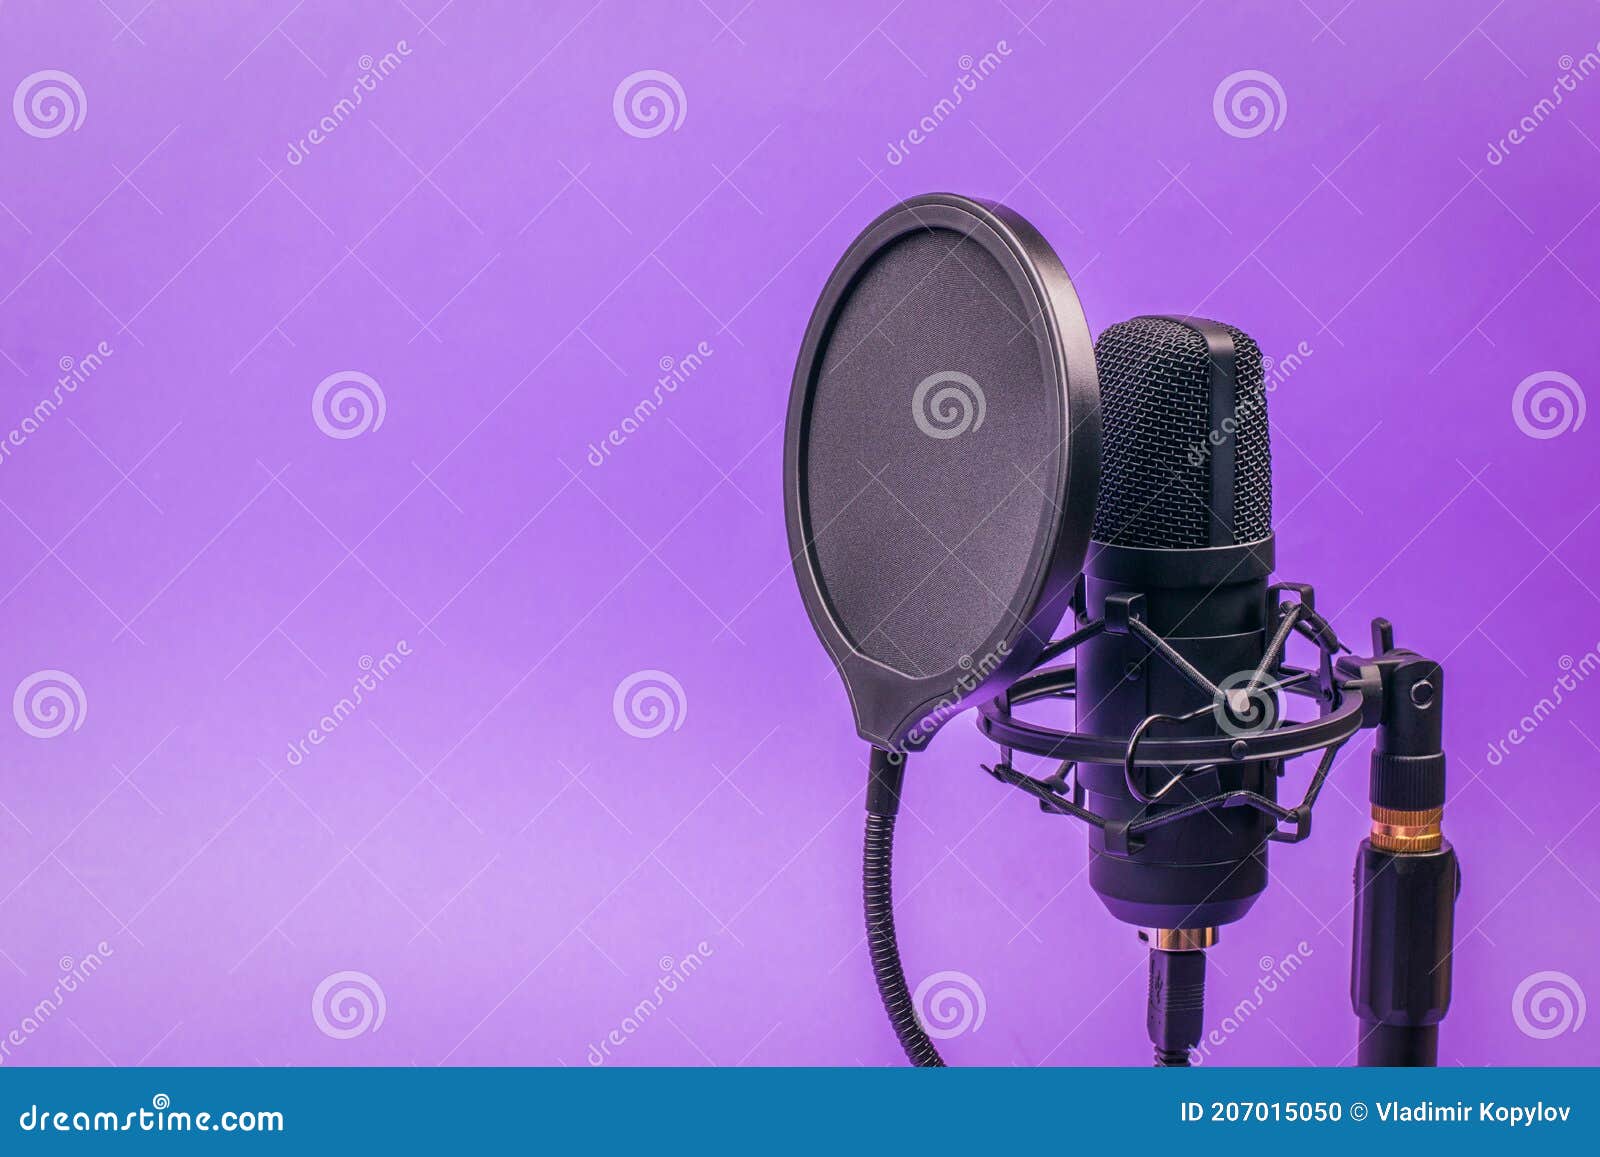 Modern Condenser Microphone on a Stand on a Purple Background Stock ...